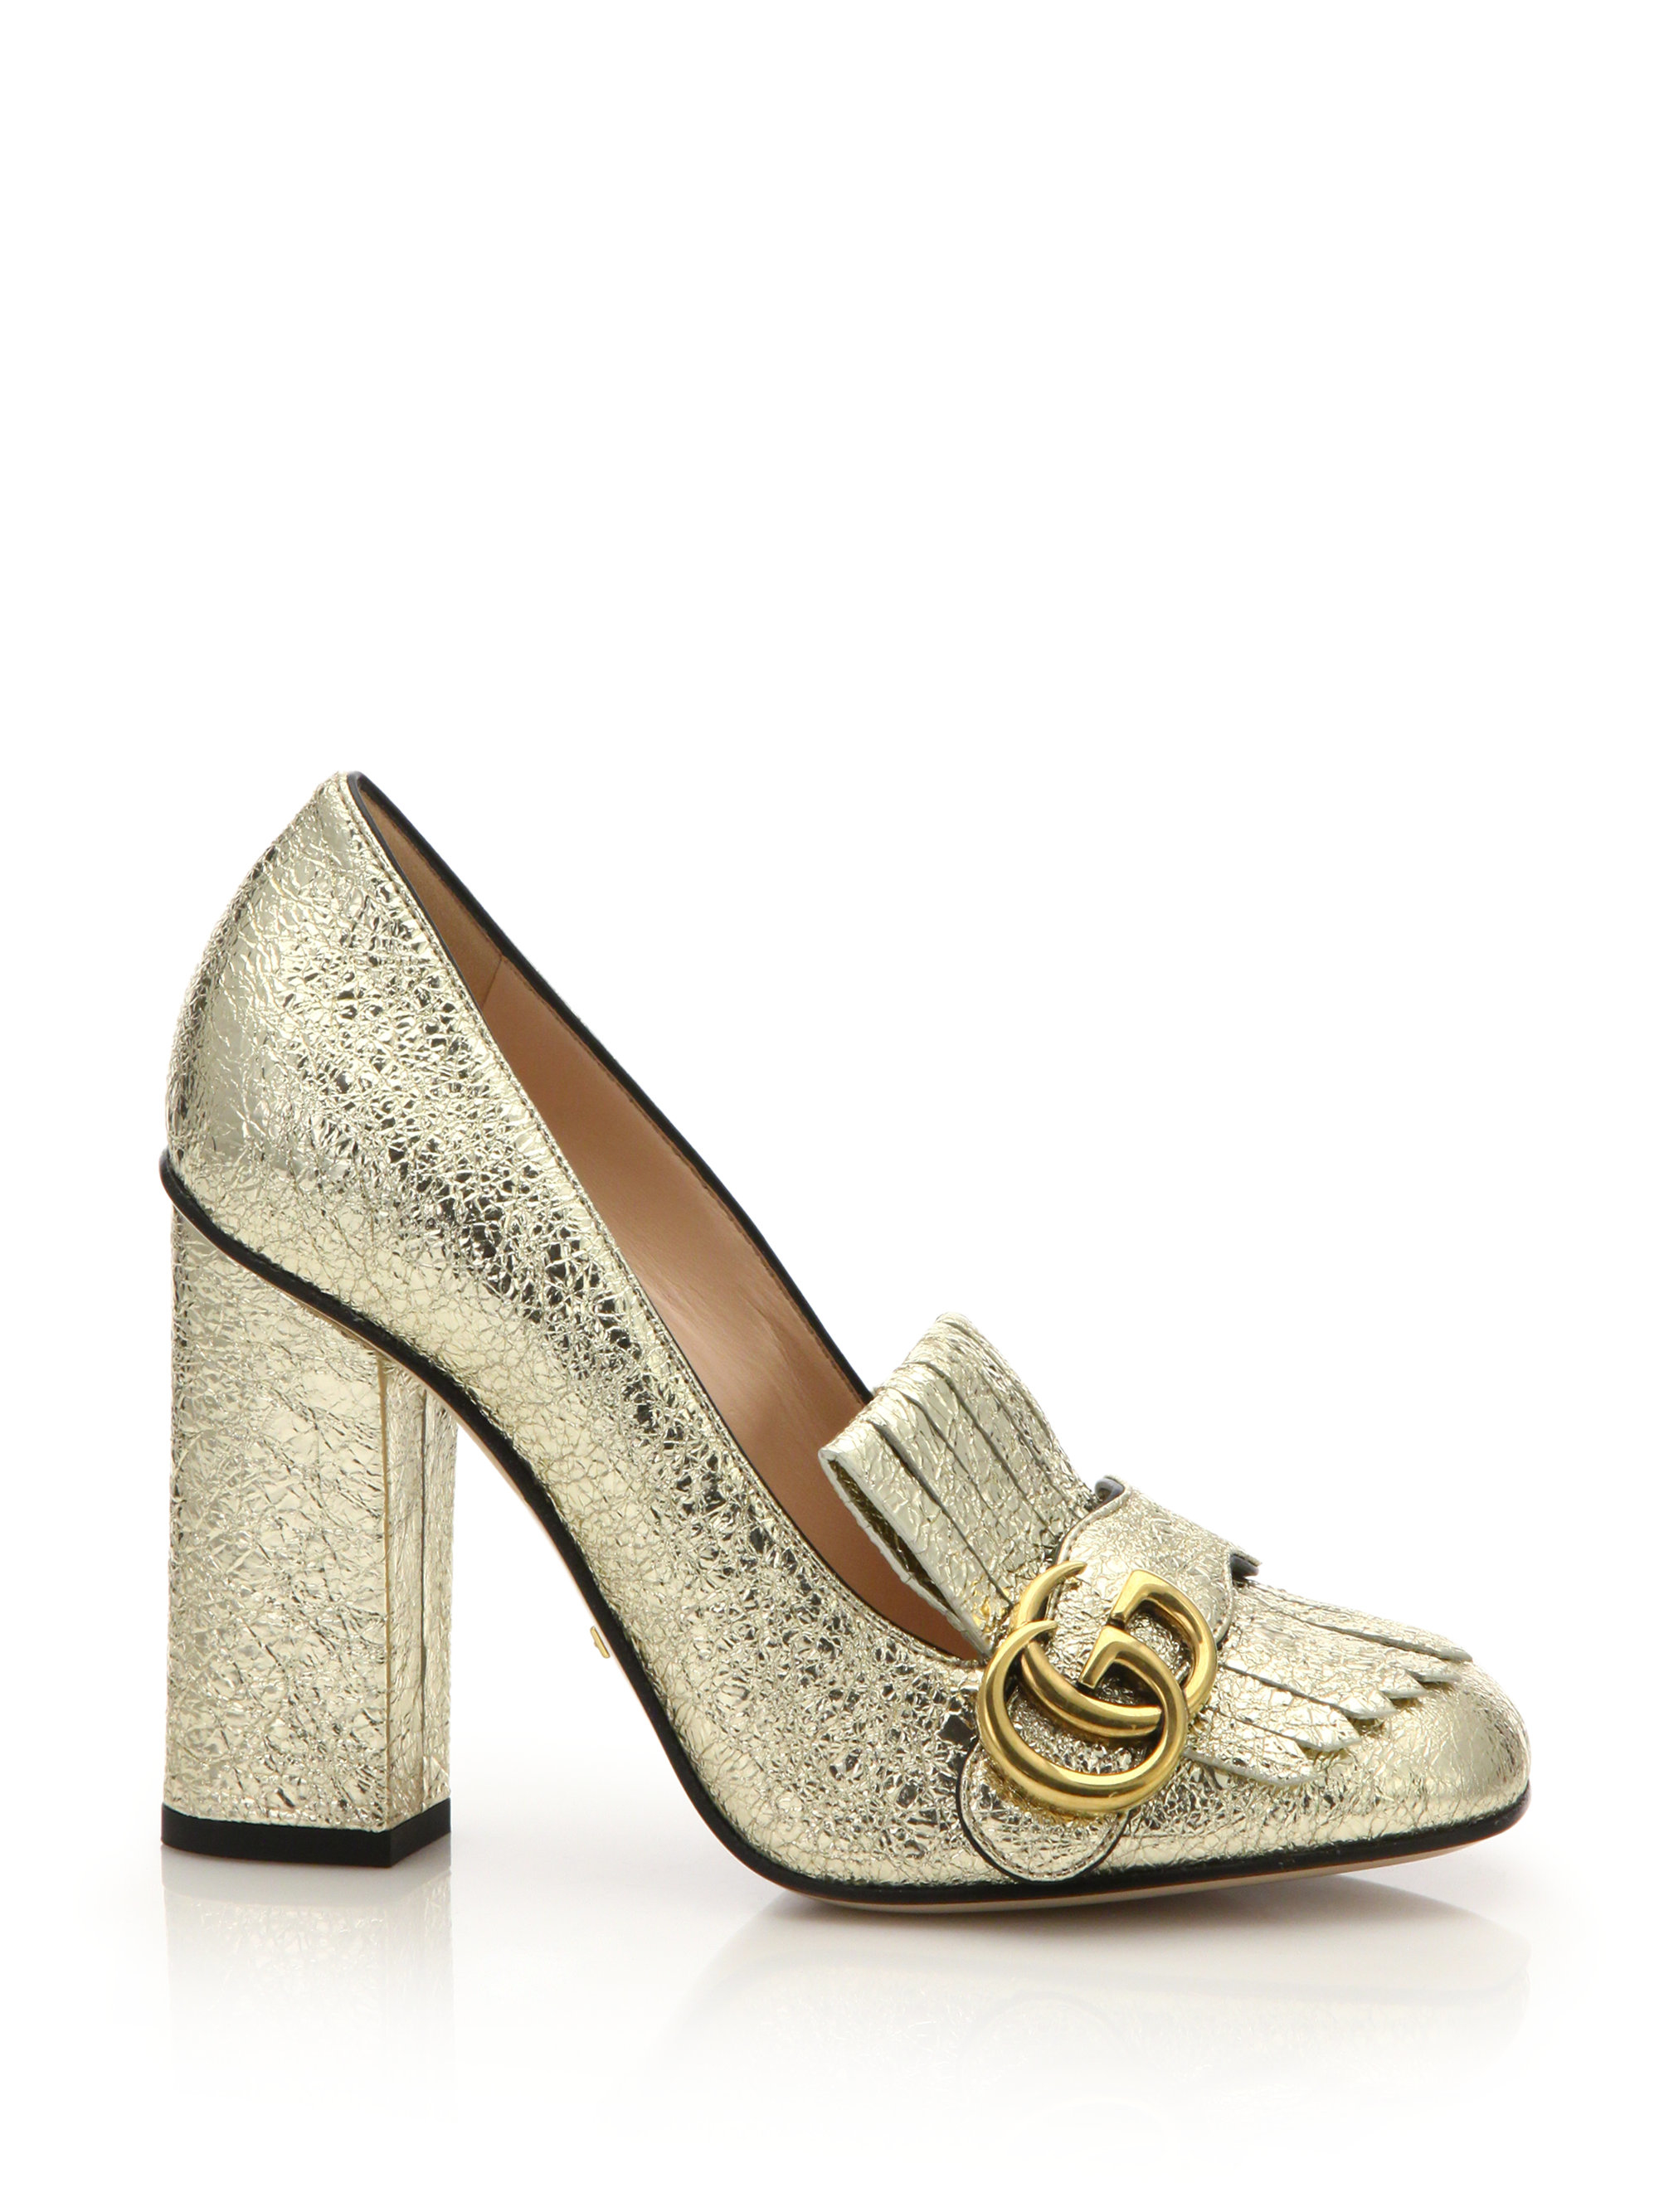 Gucci Marmont Gg Metallic Leather Pumps in Gold (platinum) | Lyst